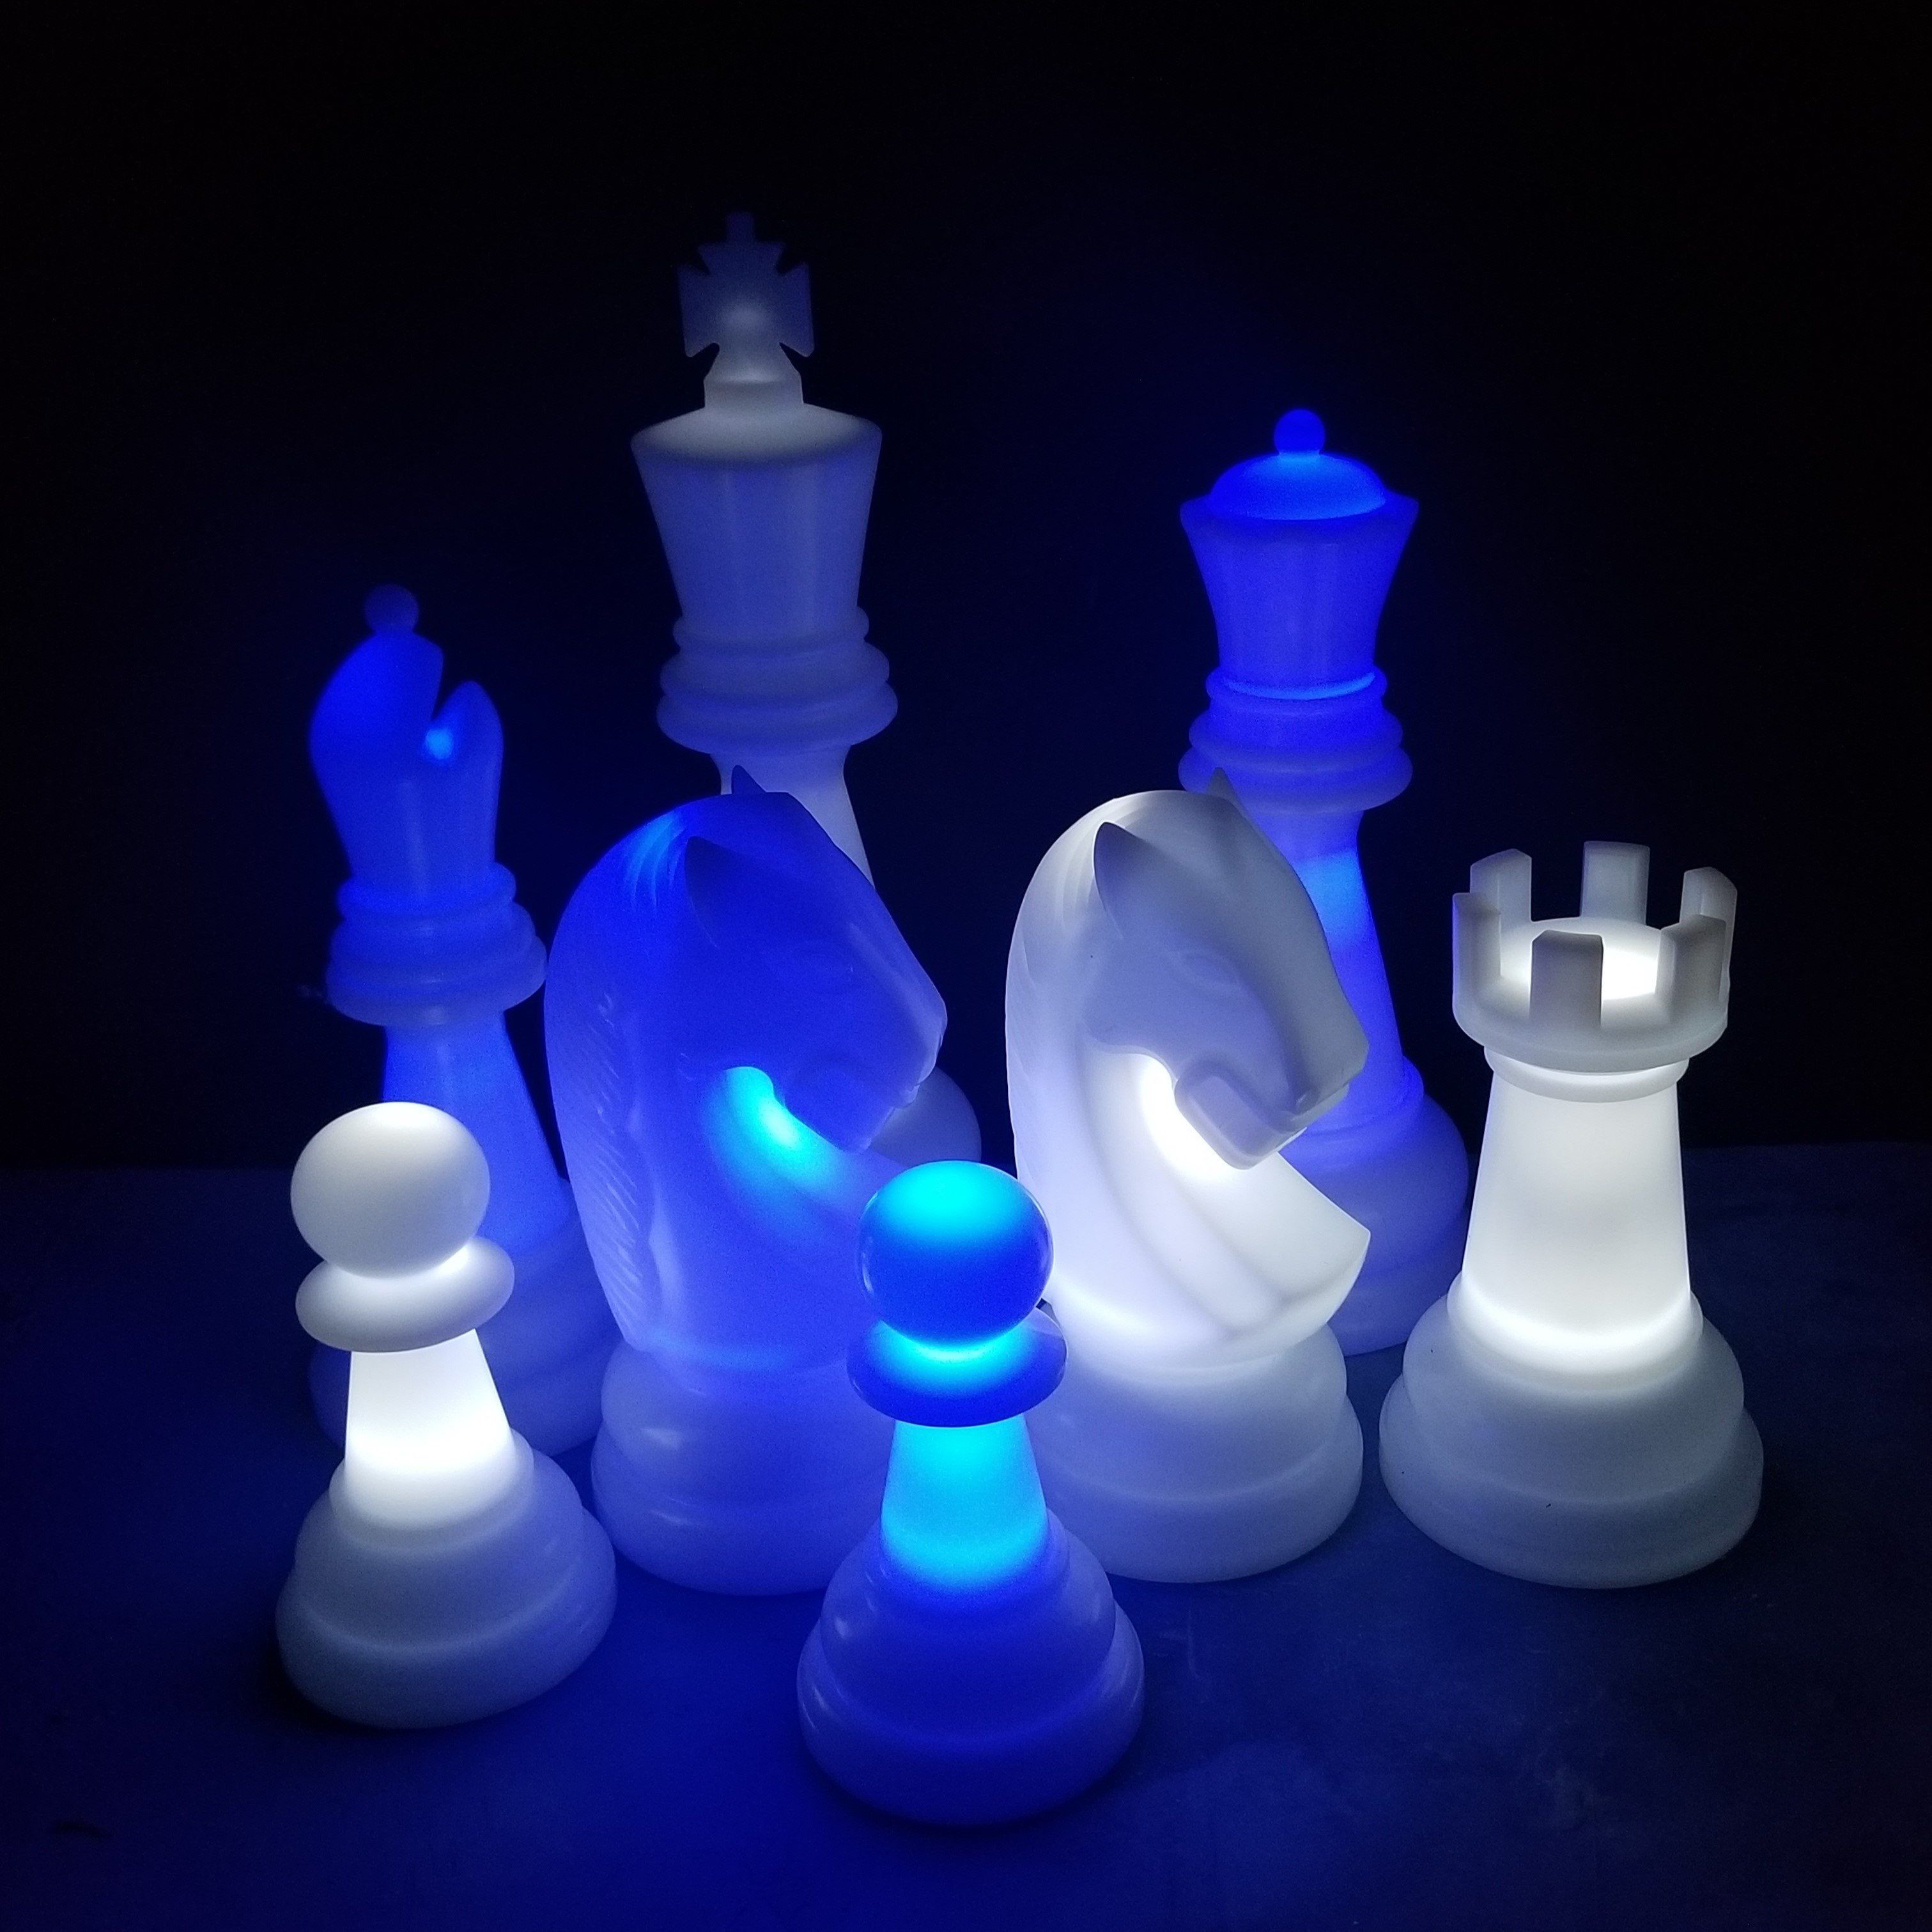 The Perfect 26 Inch Perfect Light-Up Giant Chess Set - Option 2 - Night Time Only Set